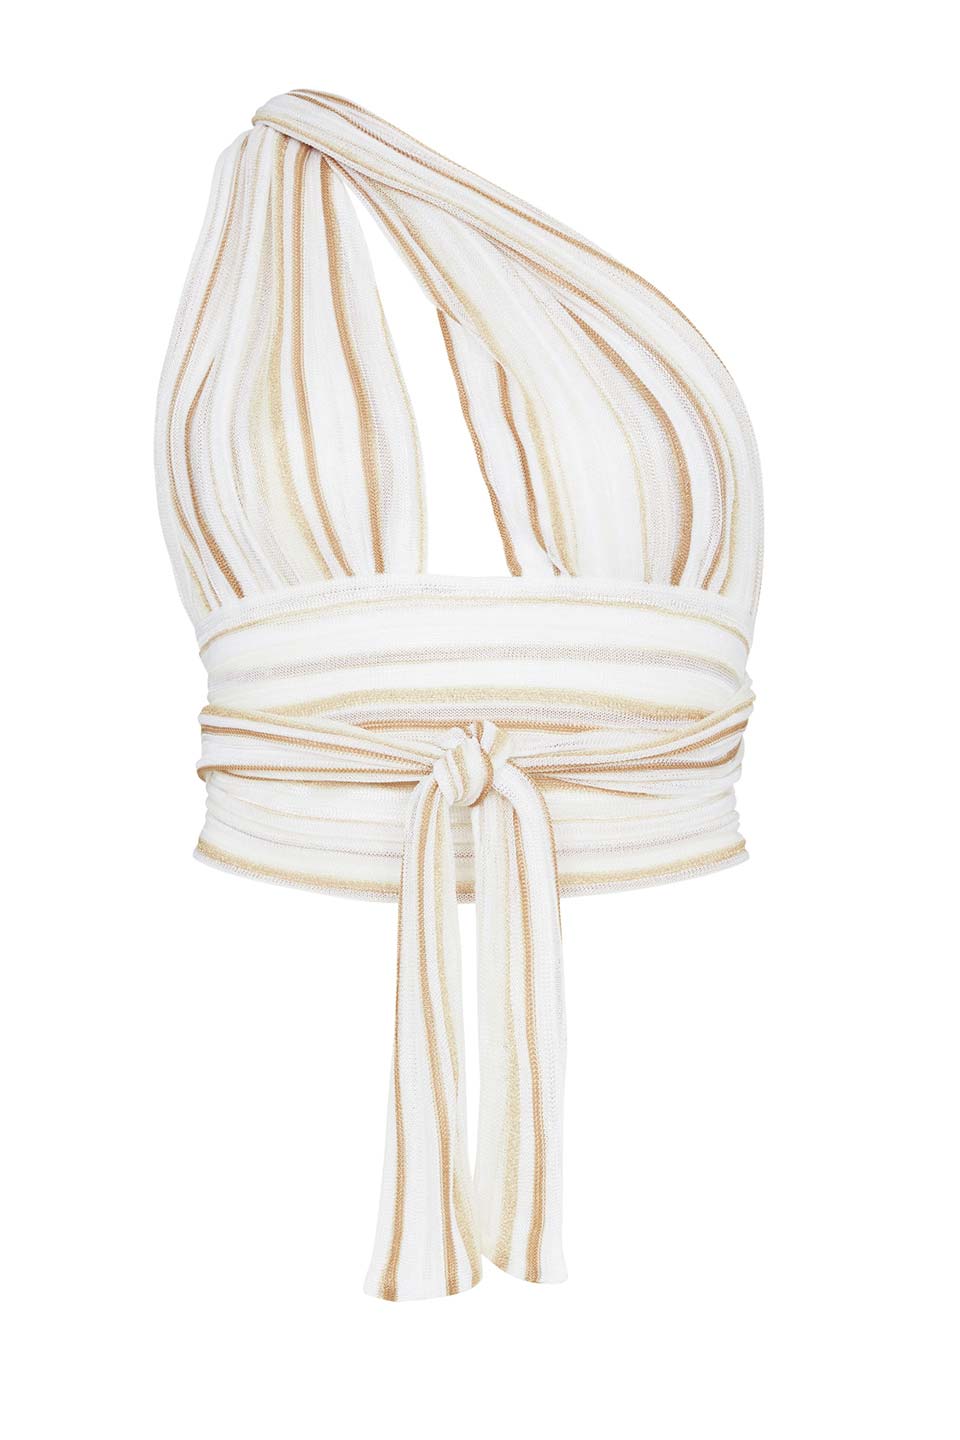 Fashion designer Halter top in white and gold color, product view